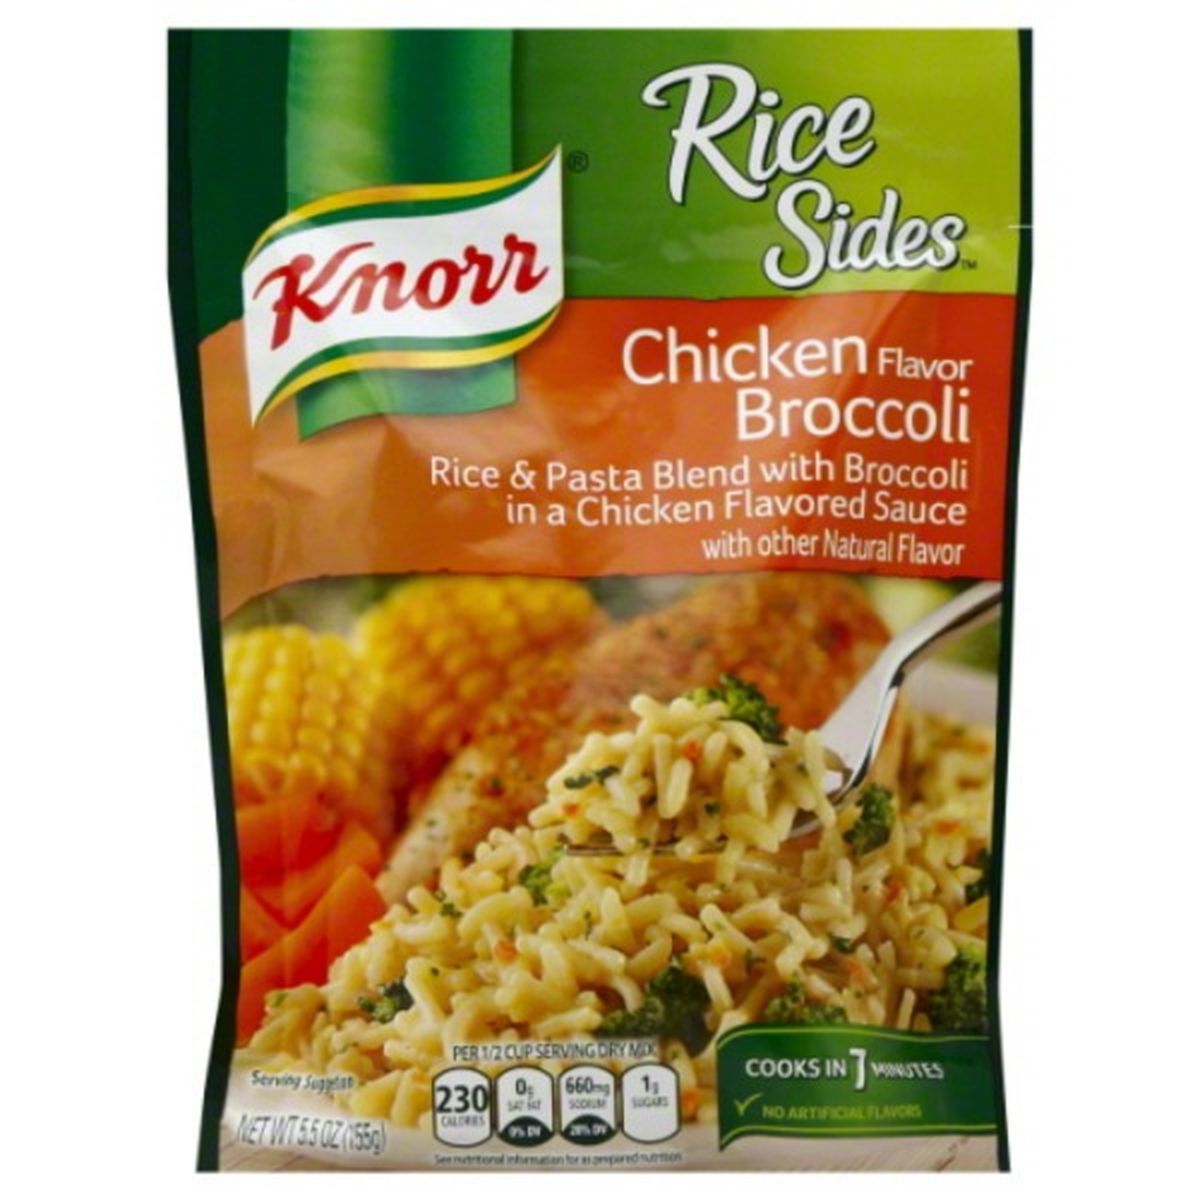 Calories in Knorr Rice Sides Rice & Pasta Blend, Chicken Flavor Broccoli